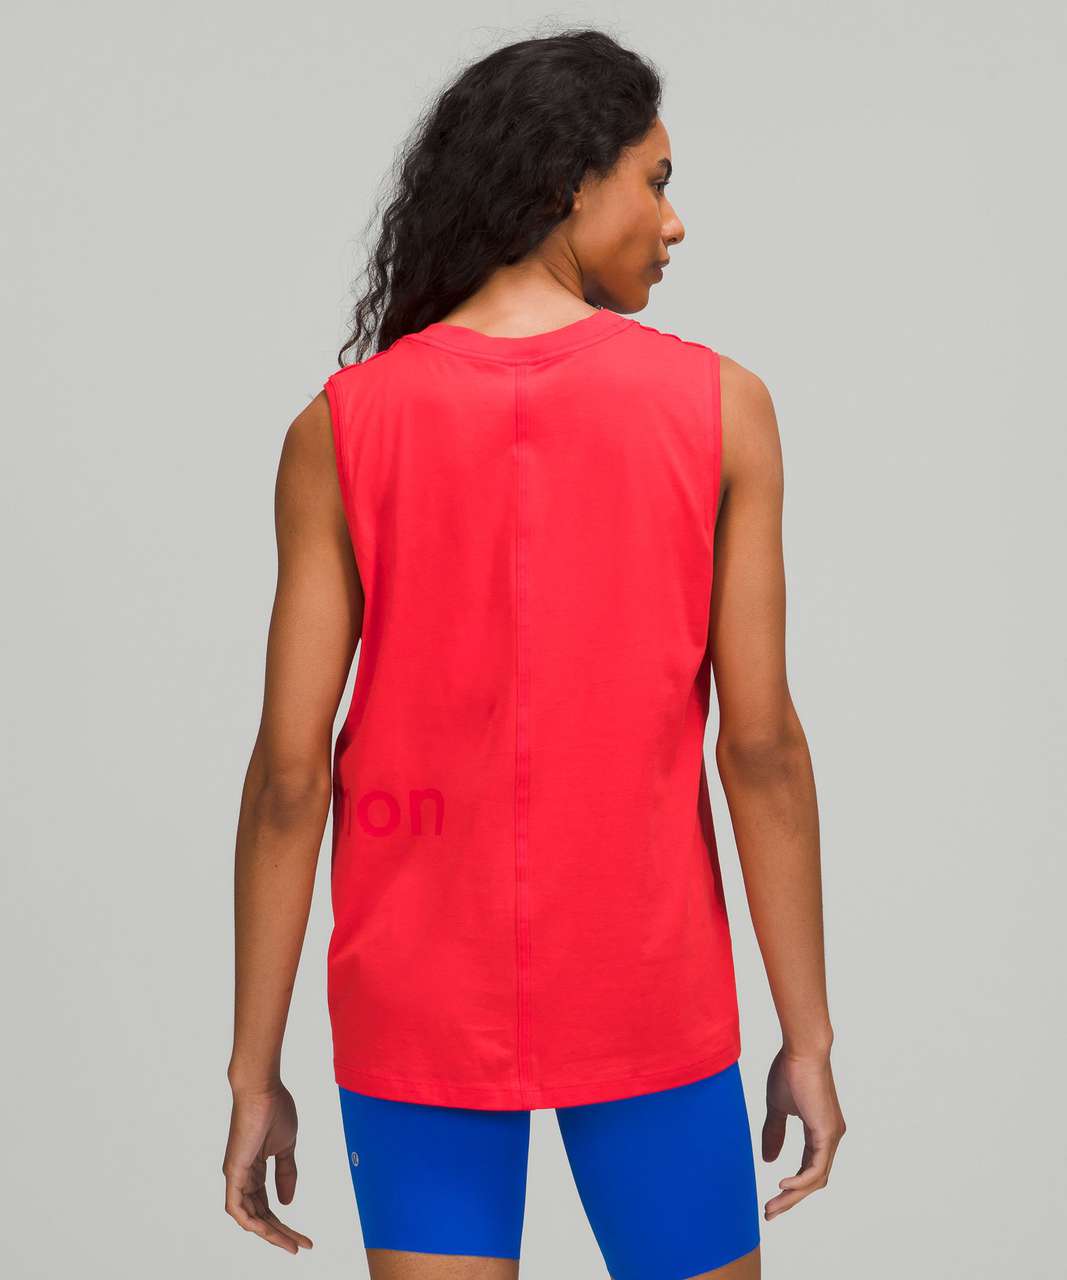 Lululemon All Yours Tank Top *Graphic - Love Red